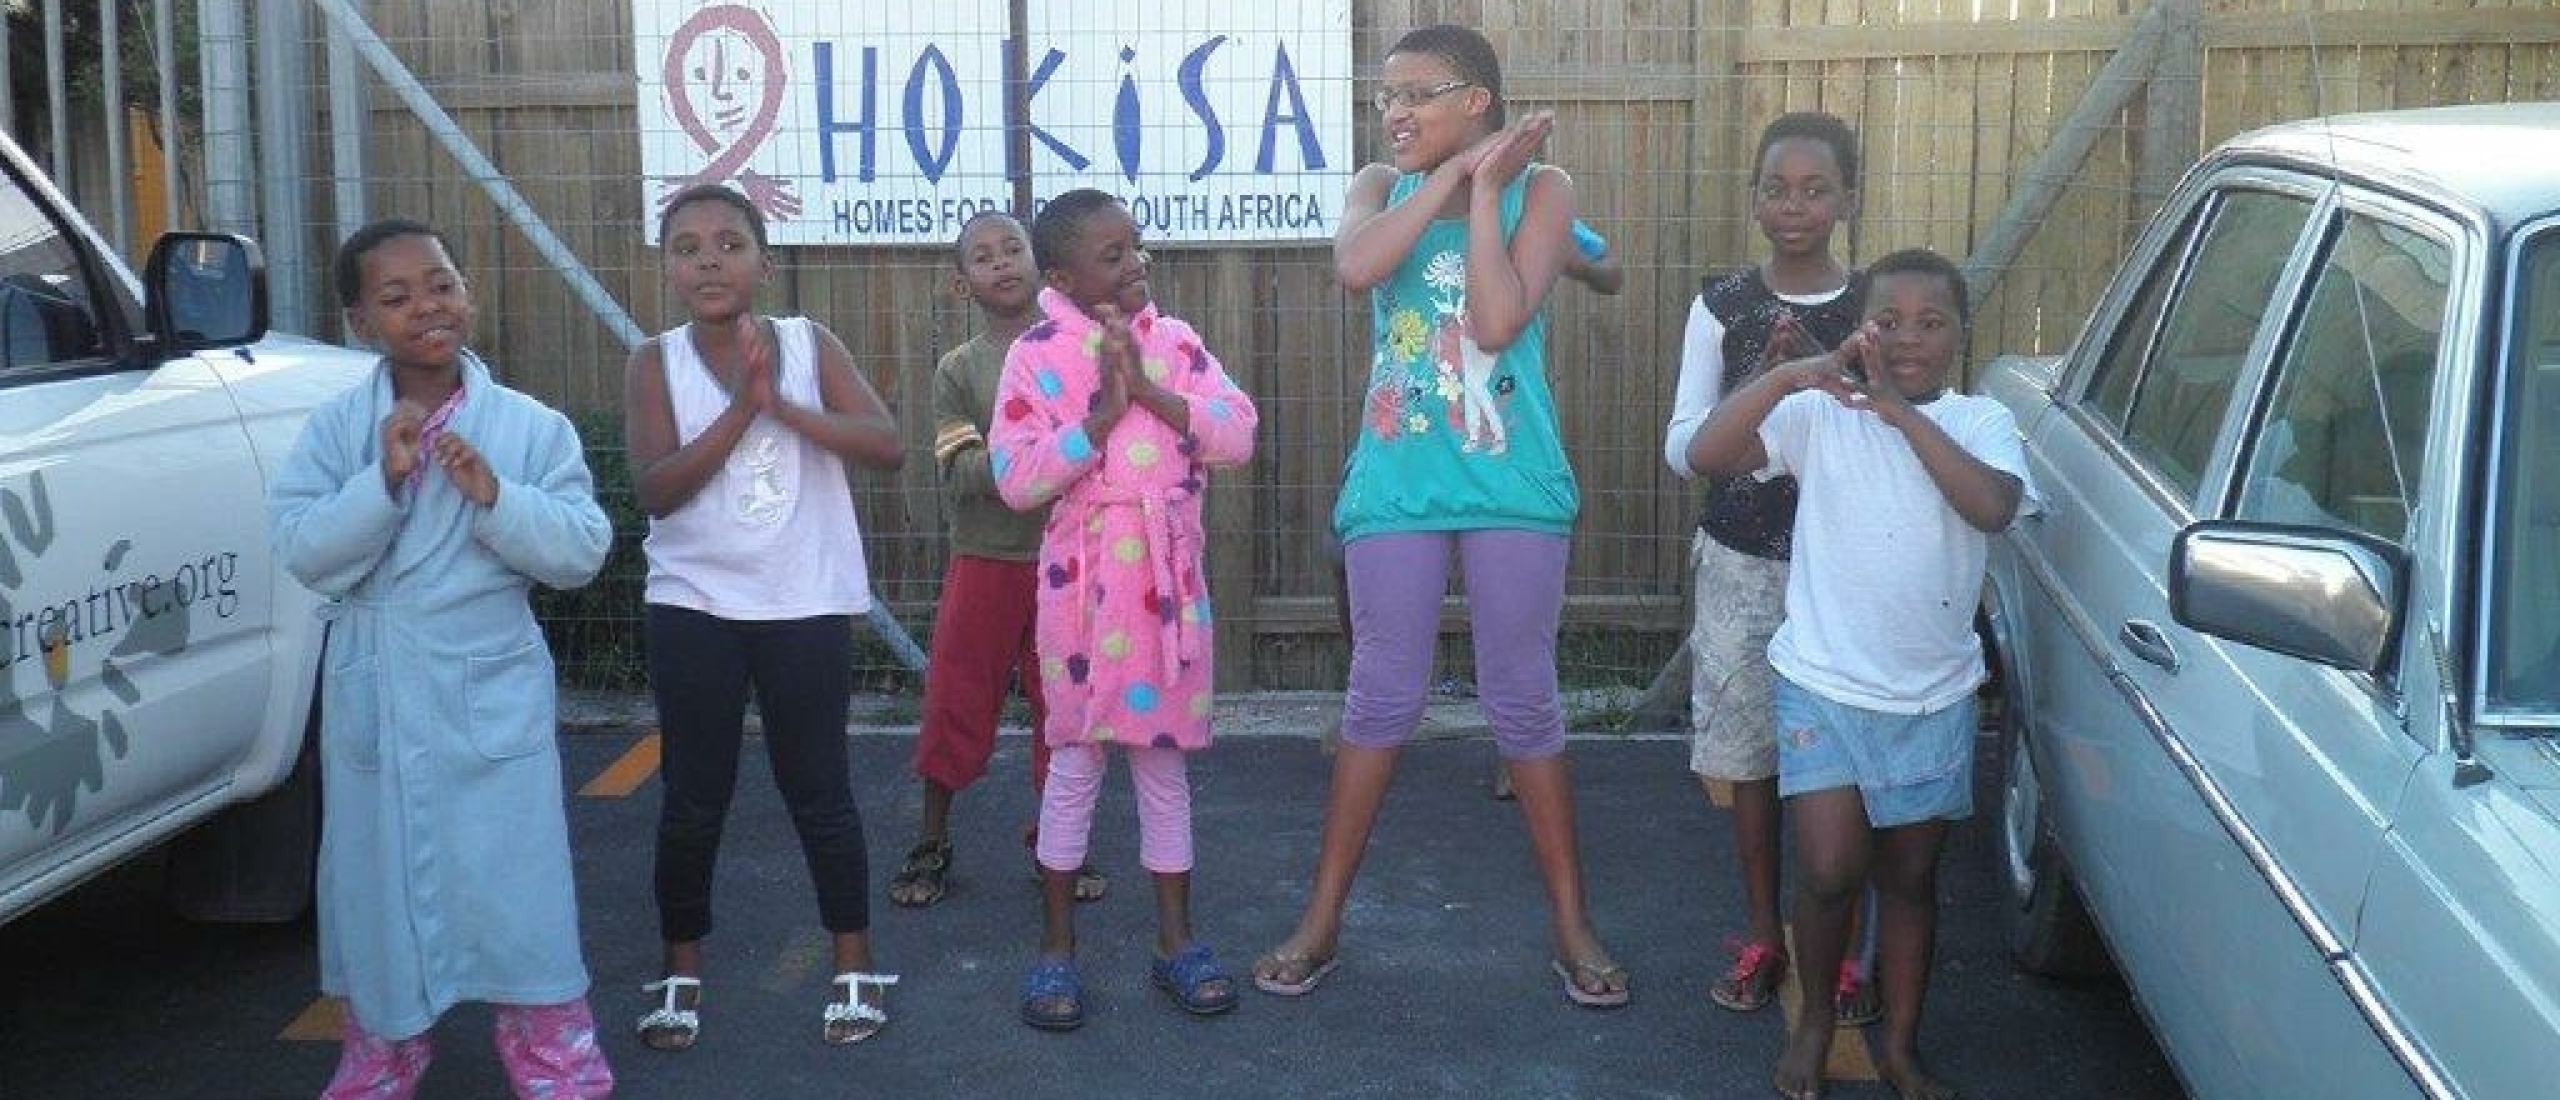 HOKISA - Homes for Kids in South Africa